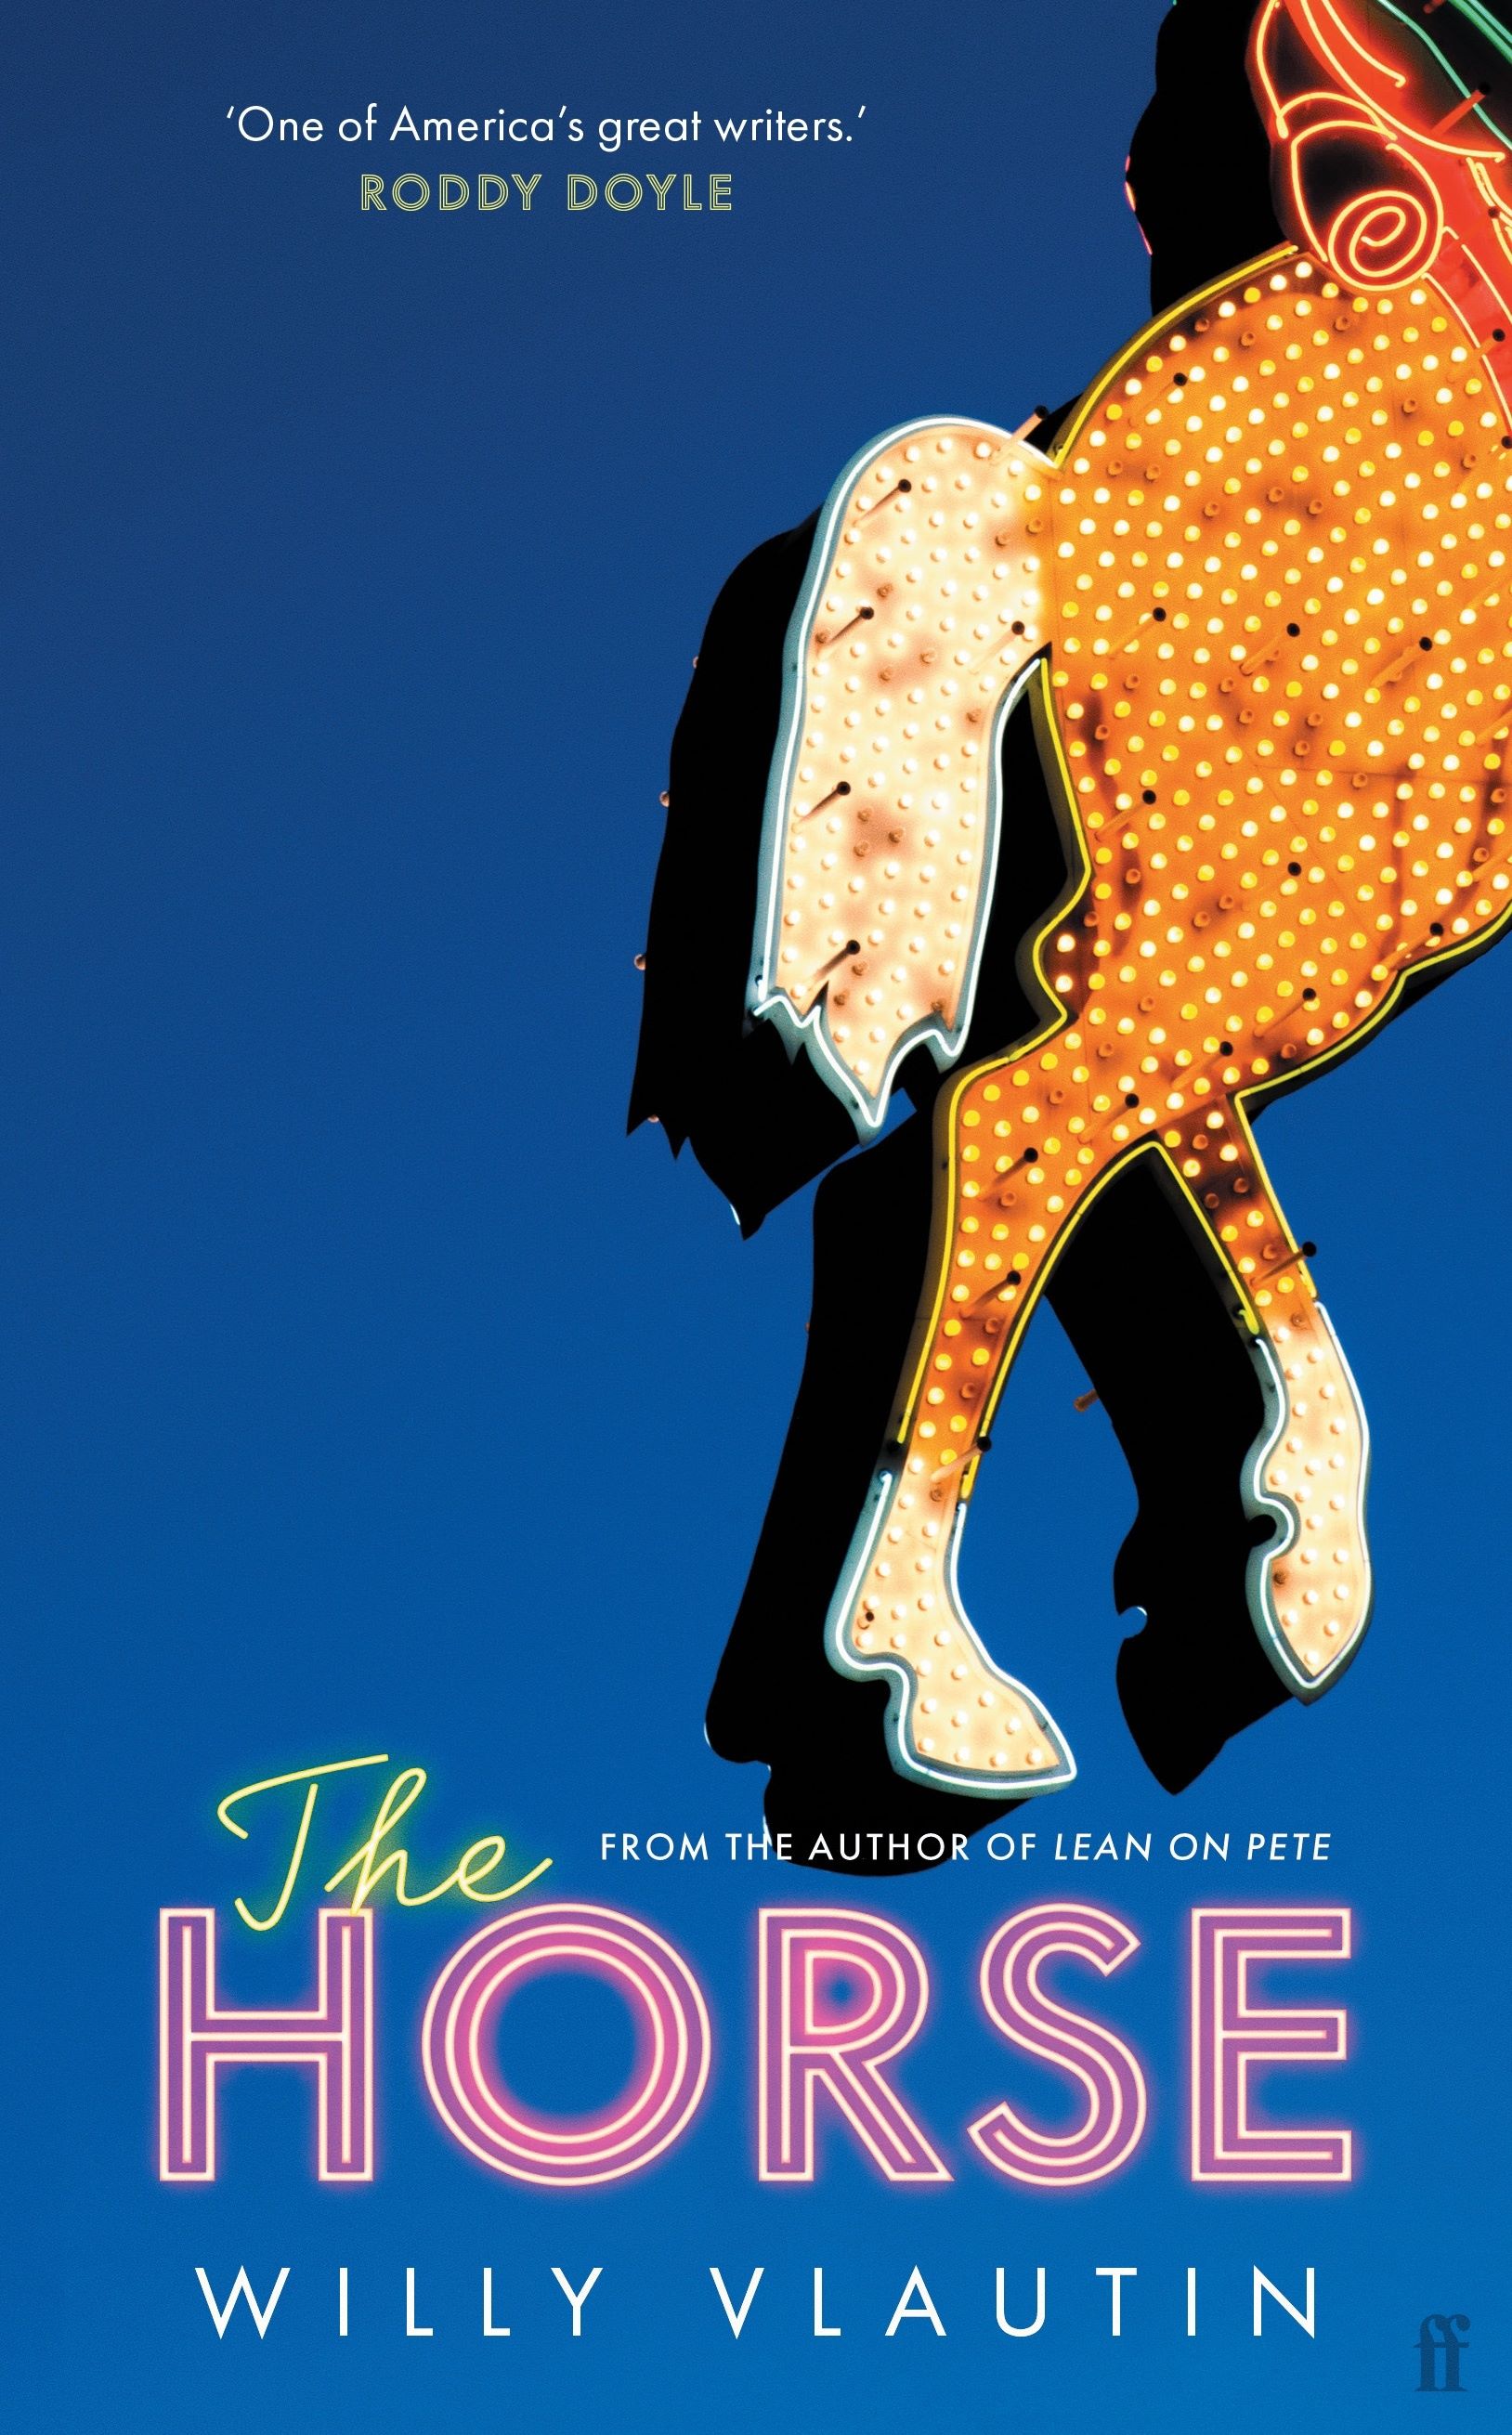 Cover of The Horse; a blue background showing the hind legs of a horse made of lights; the title also appears to be in lights